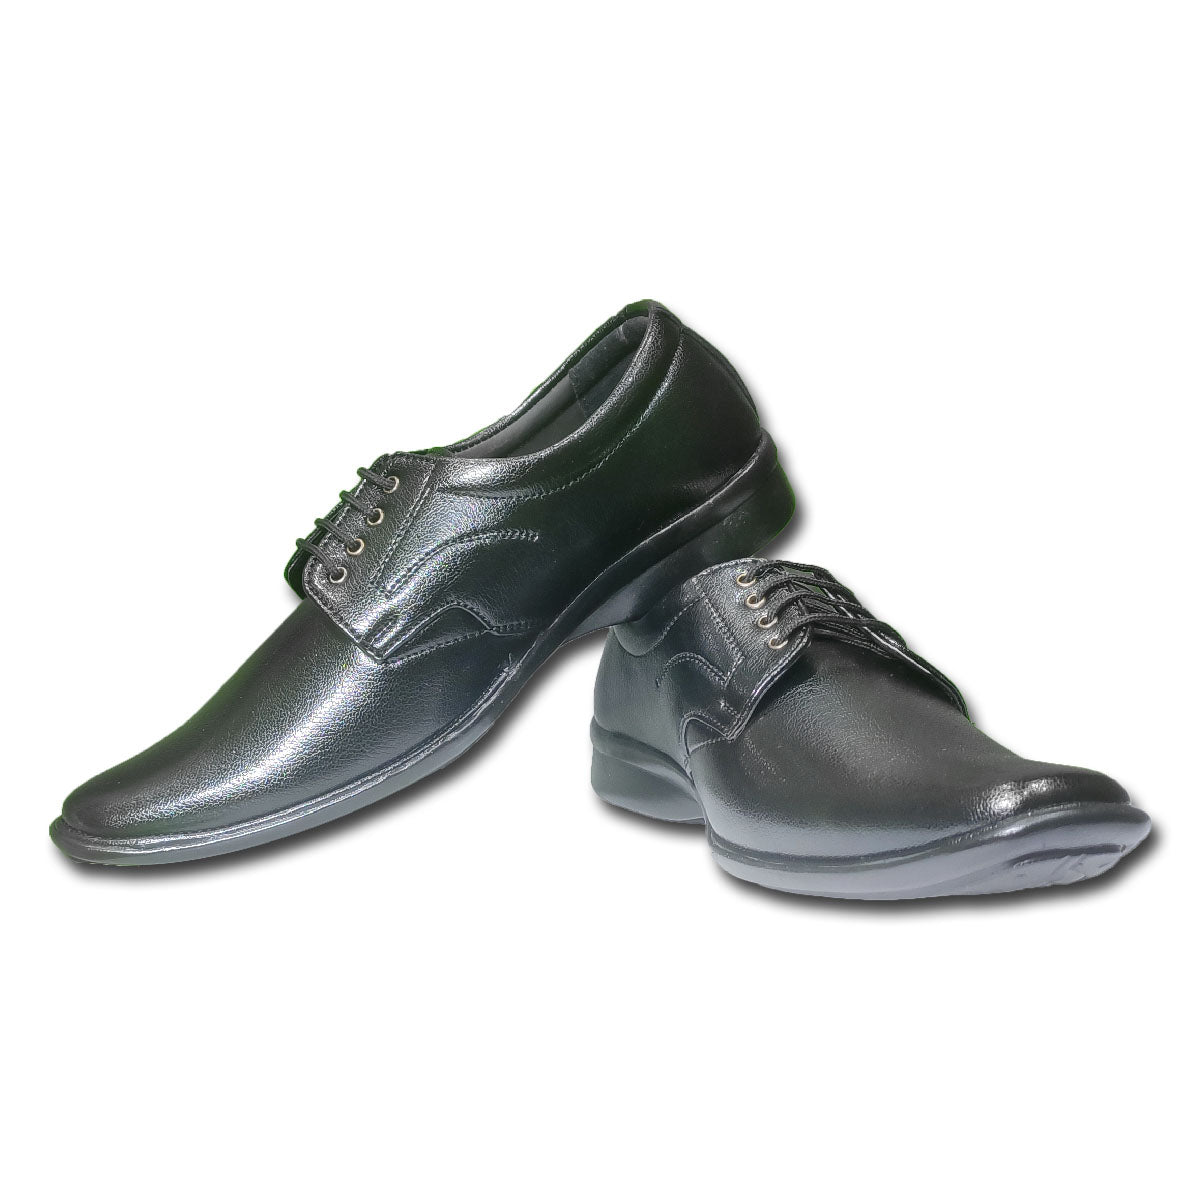 Men's Leather Wrinkle Free Formal Shoes